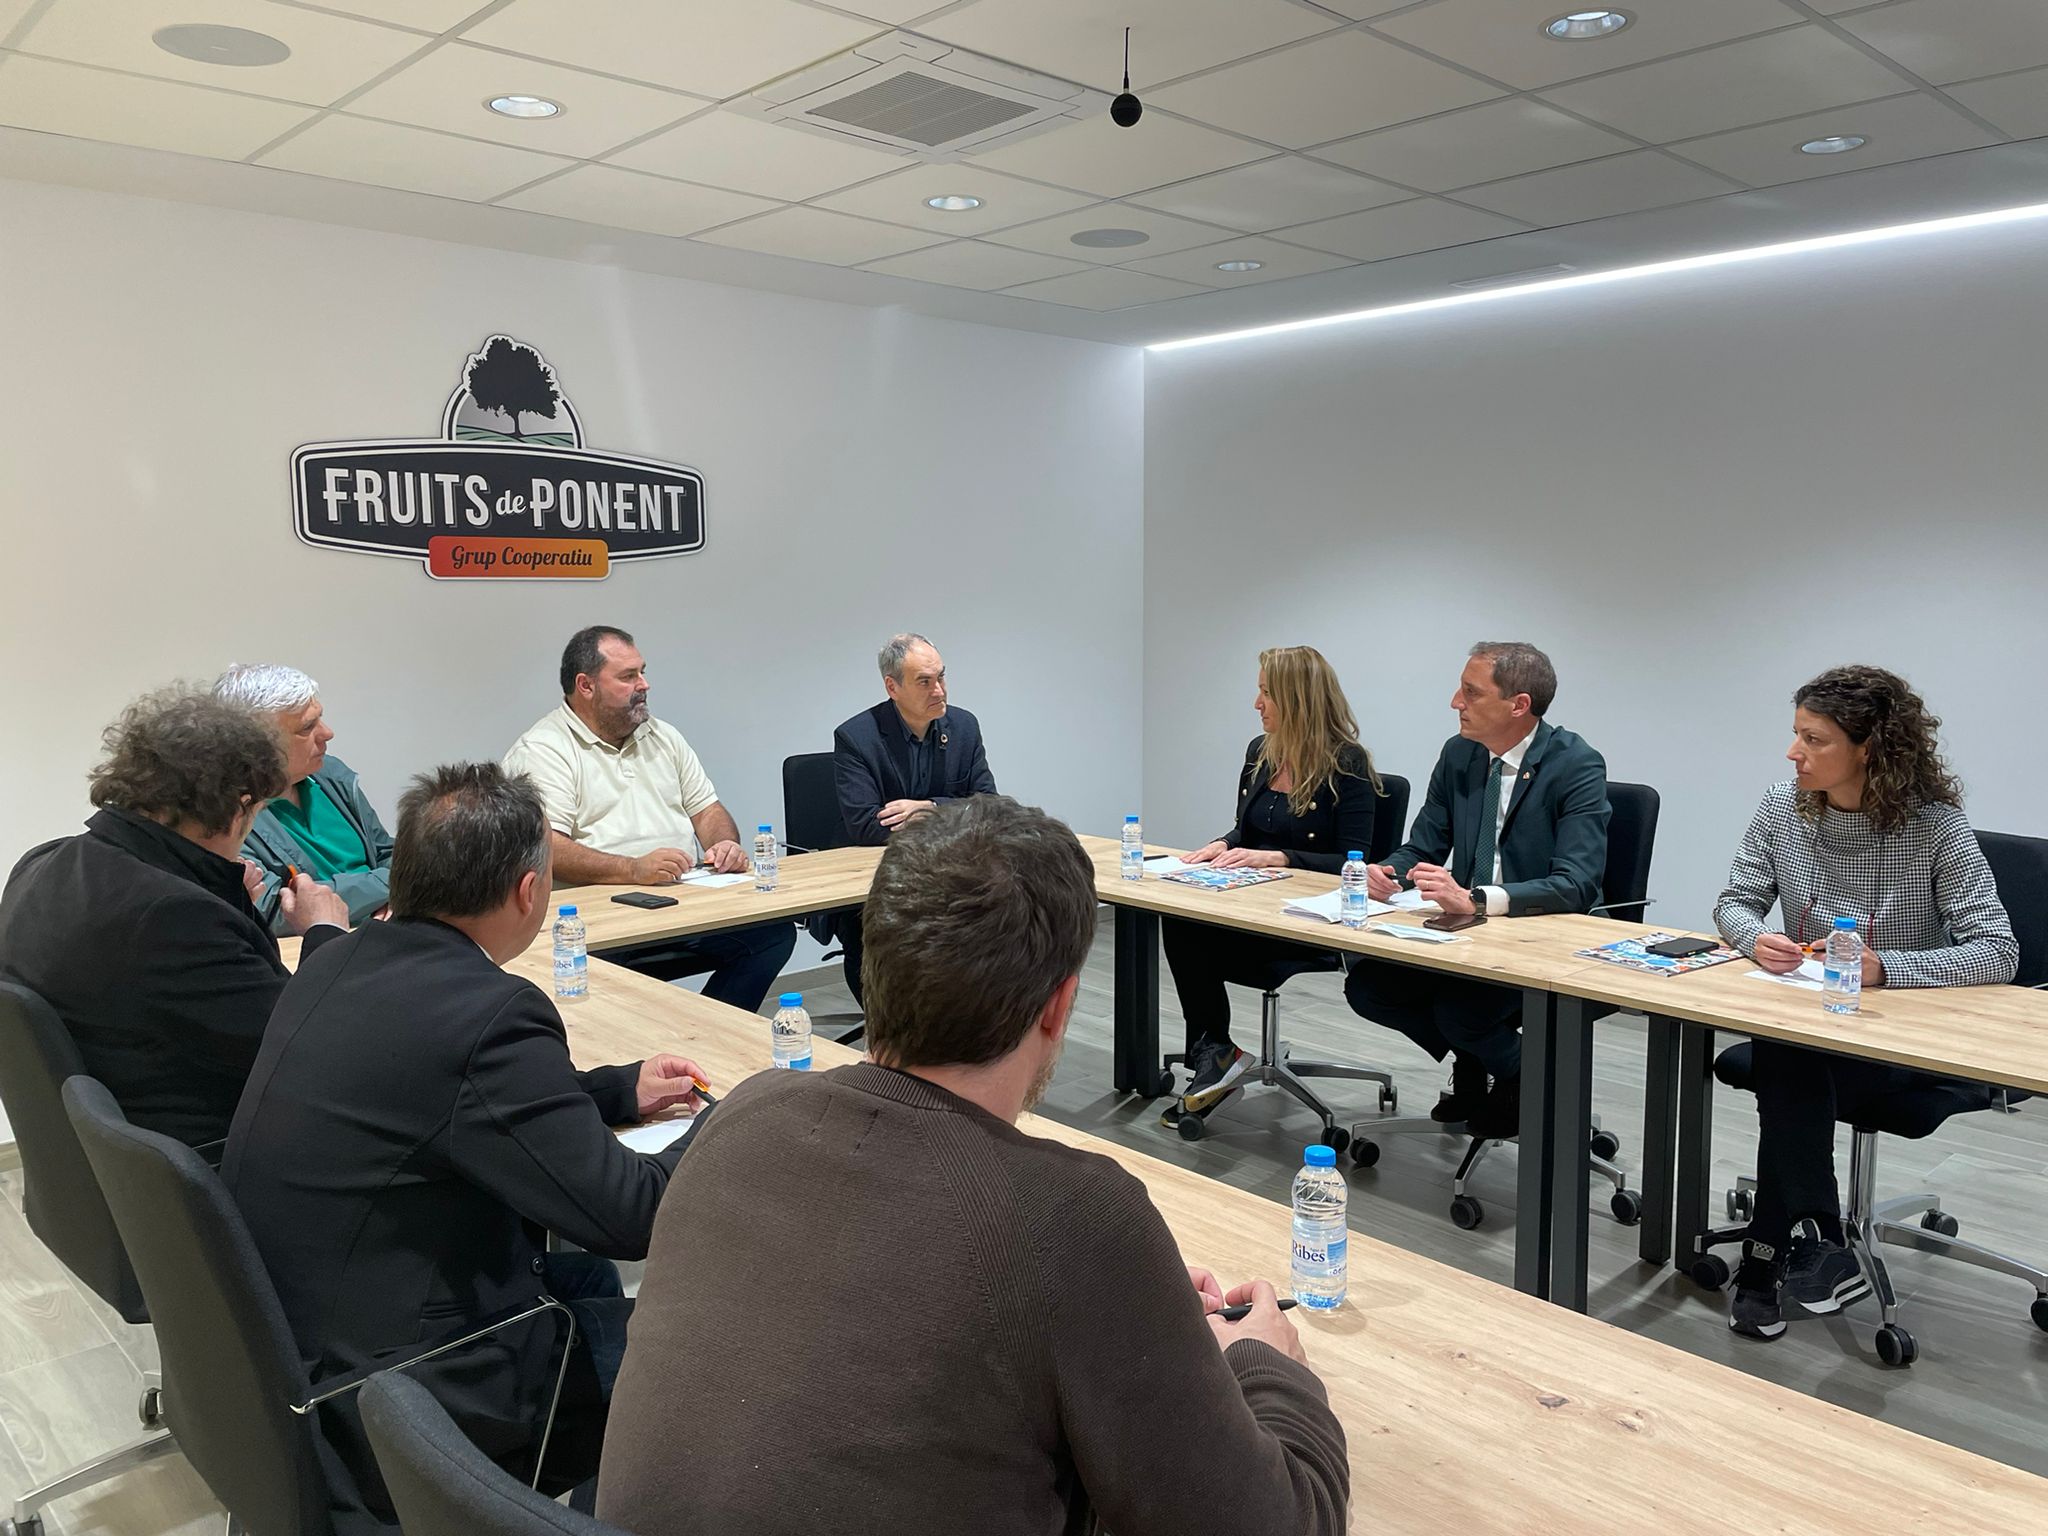 The President of Grup Cooperatiu, Benjamí Ibars and the General Manager, met with the Government Delegate, the Deputy Delegate in Lleida and other authorities